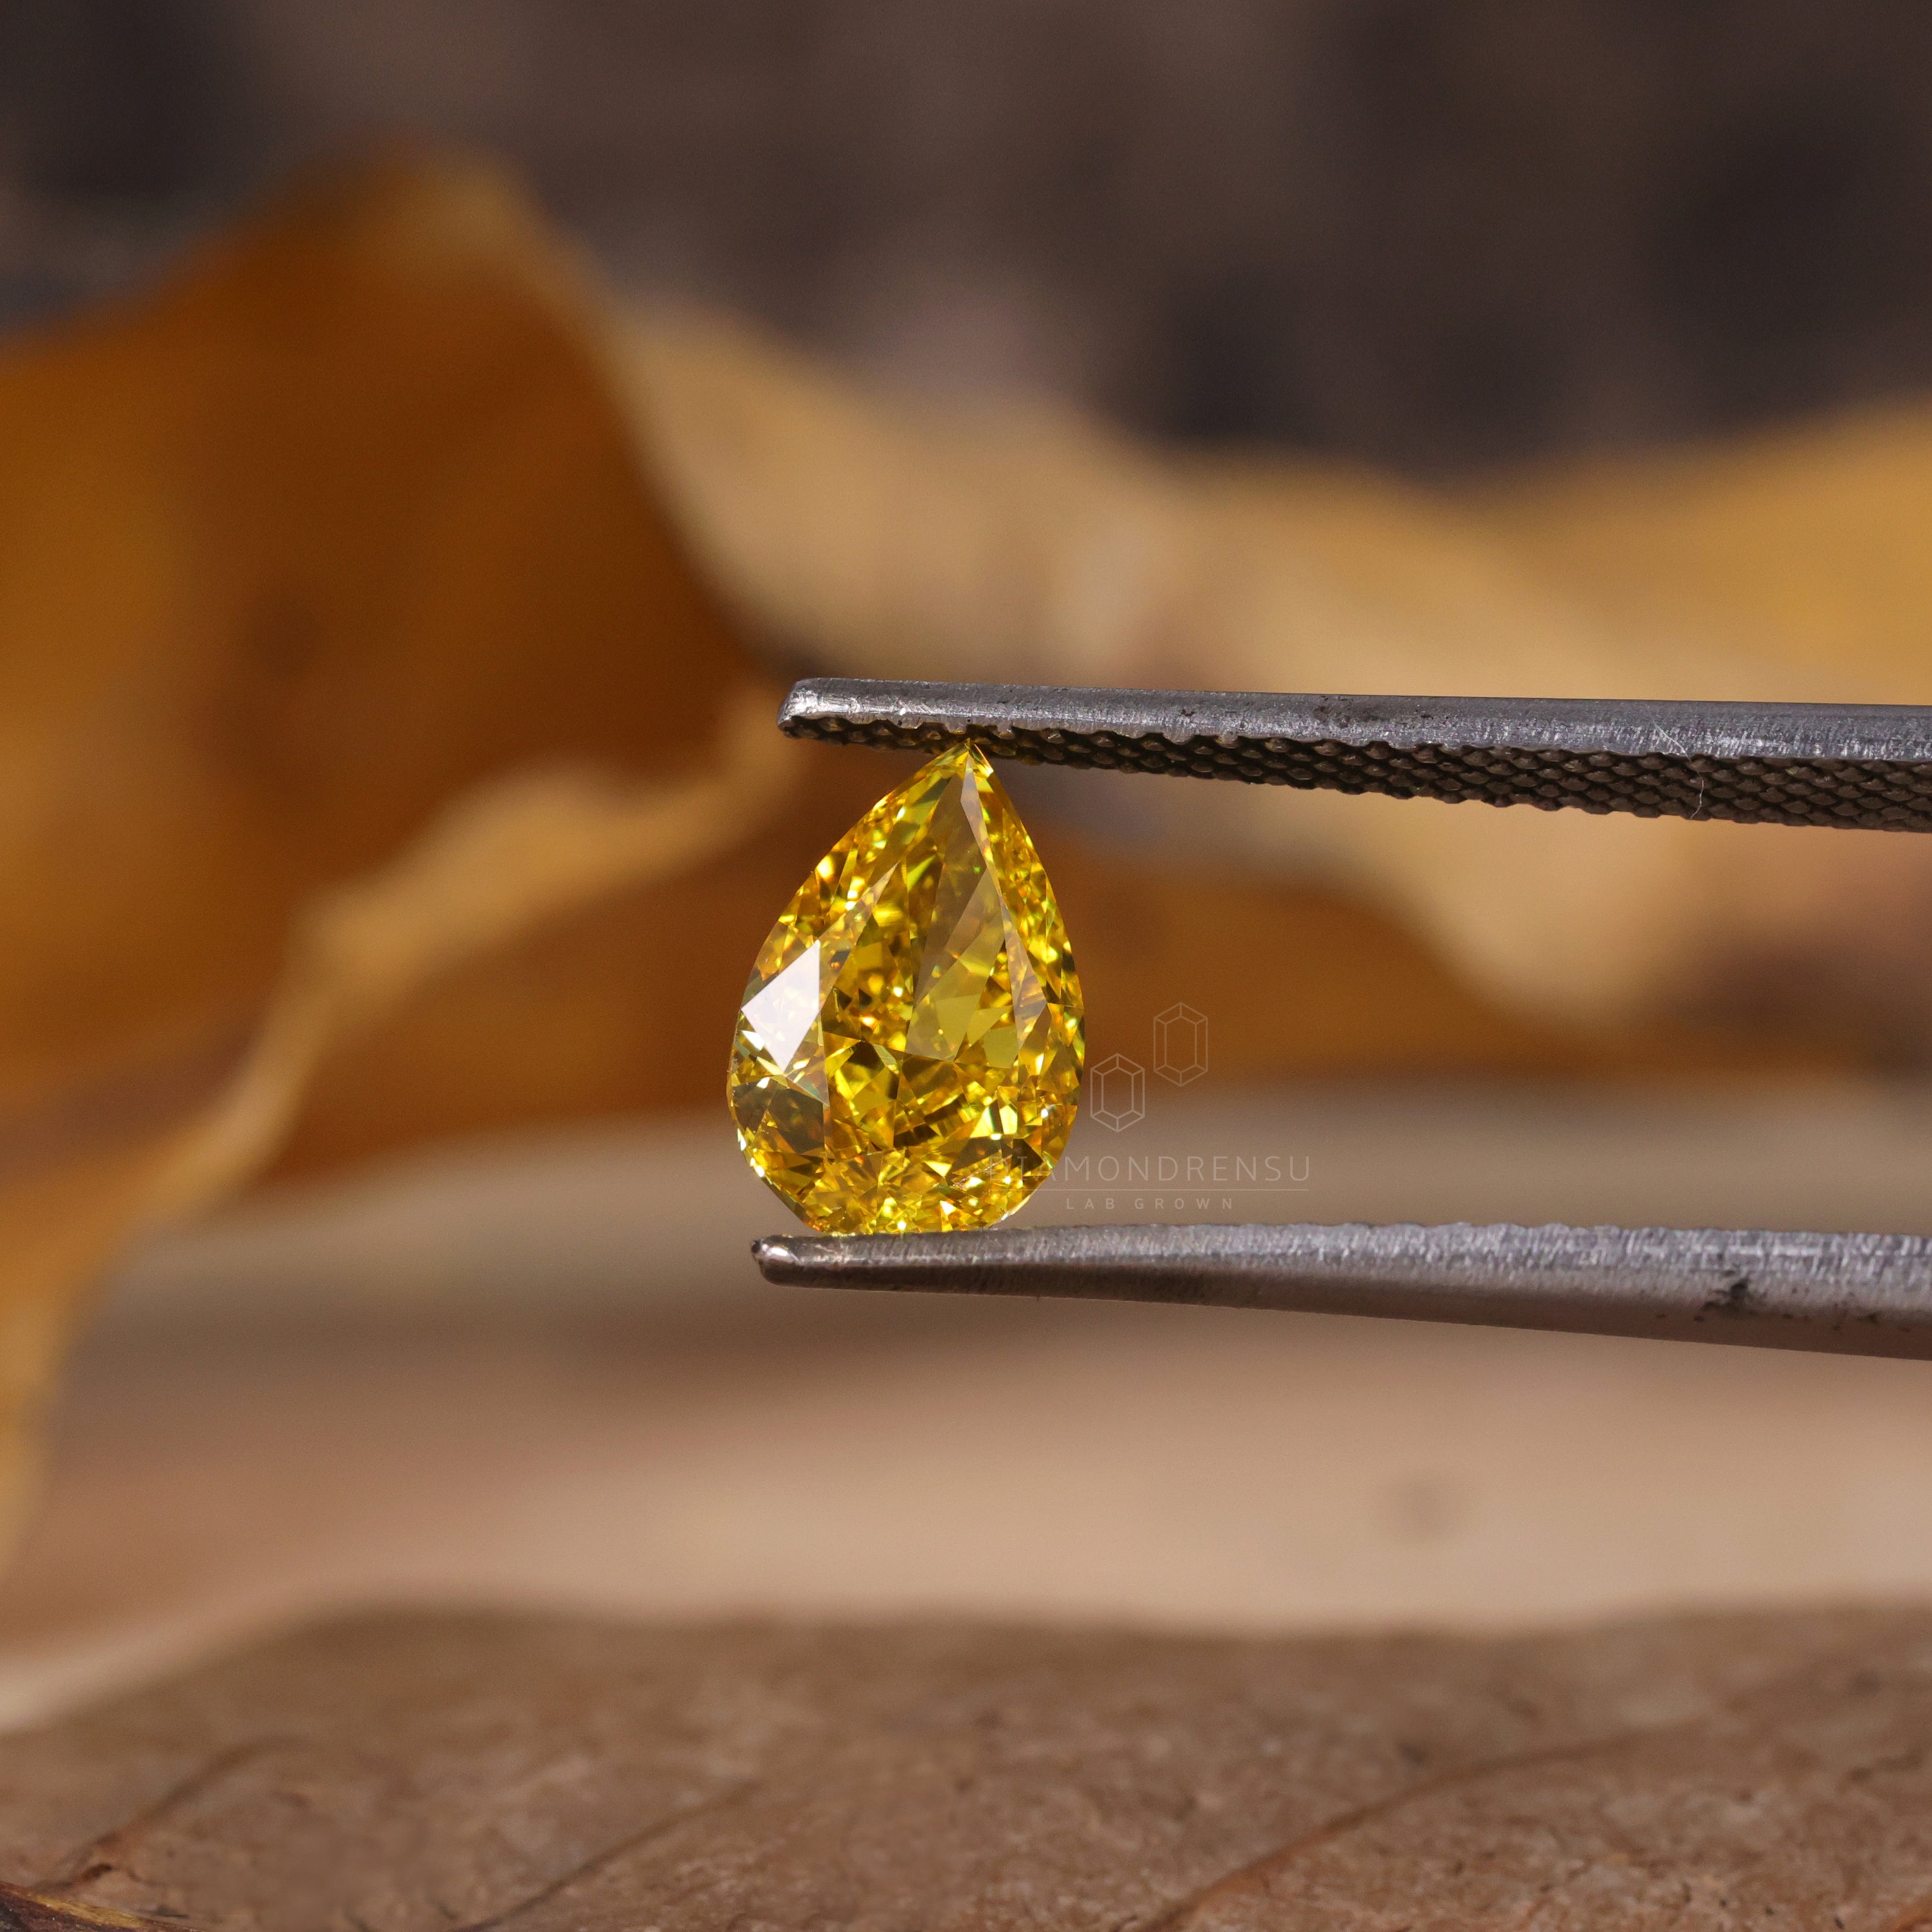 Pear Cut Yellow Lab Grown Diamond, 1.55 CT Pear Cut Loose Diamond for Engagement Ring or Wedding Ring